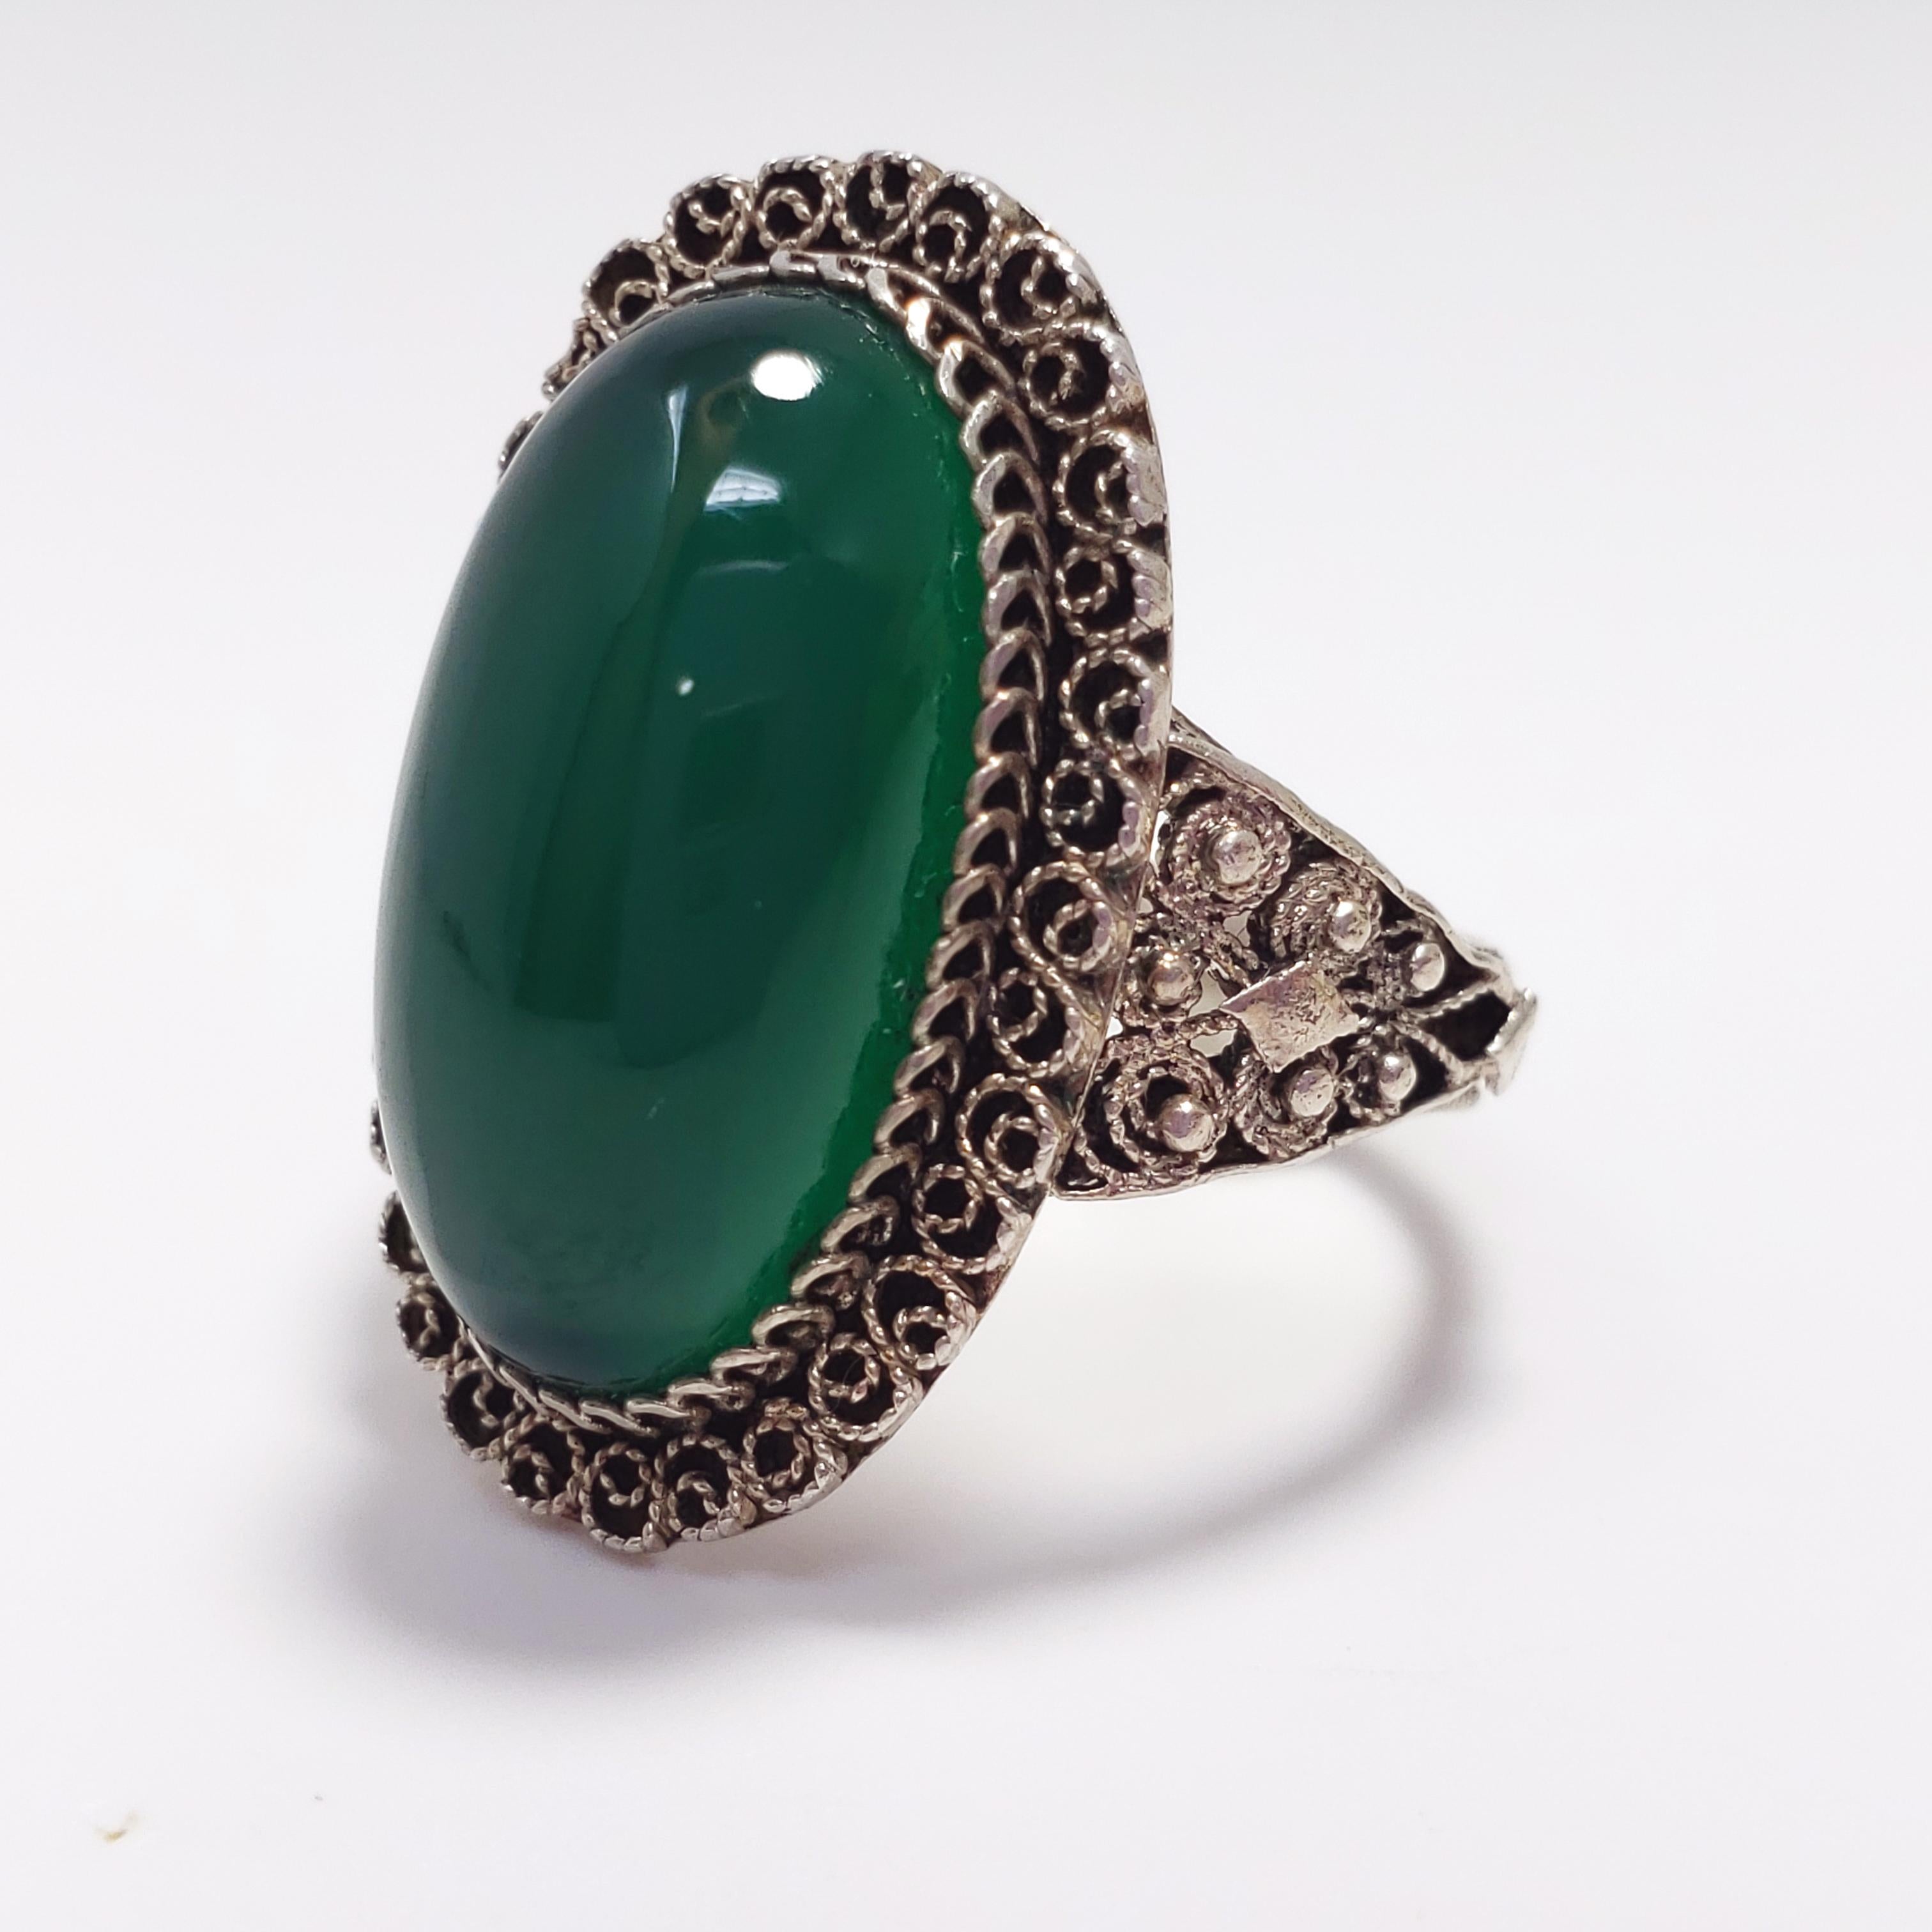 From the Victorian era, a decorative statement ring. Features a single translucent green art-glass cabochon set in .800 silver. The silver bezel and band have been accented with intricate detail, with no part of this ring left untouched! The perfect